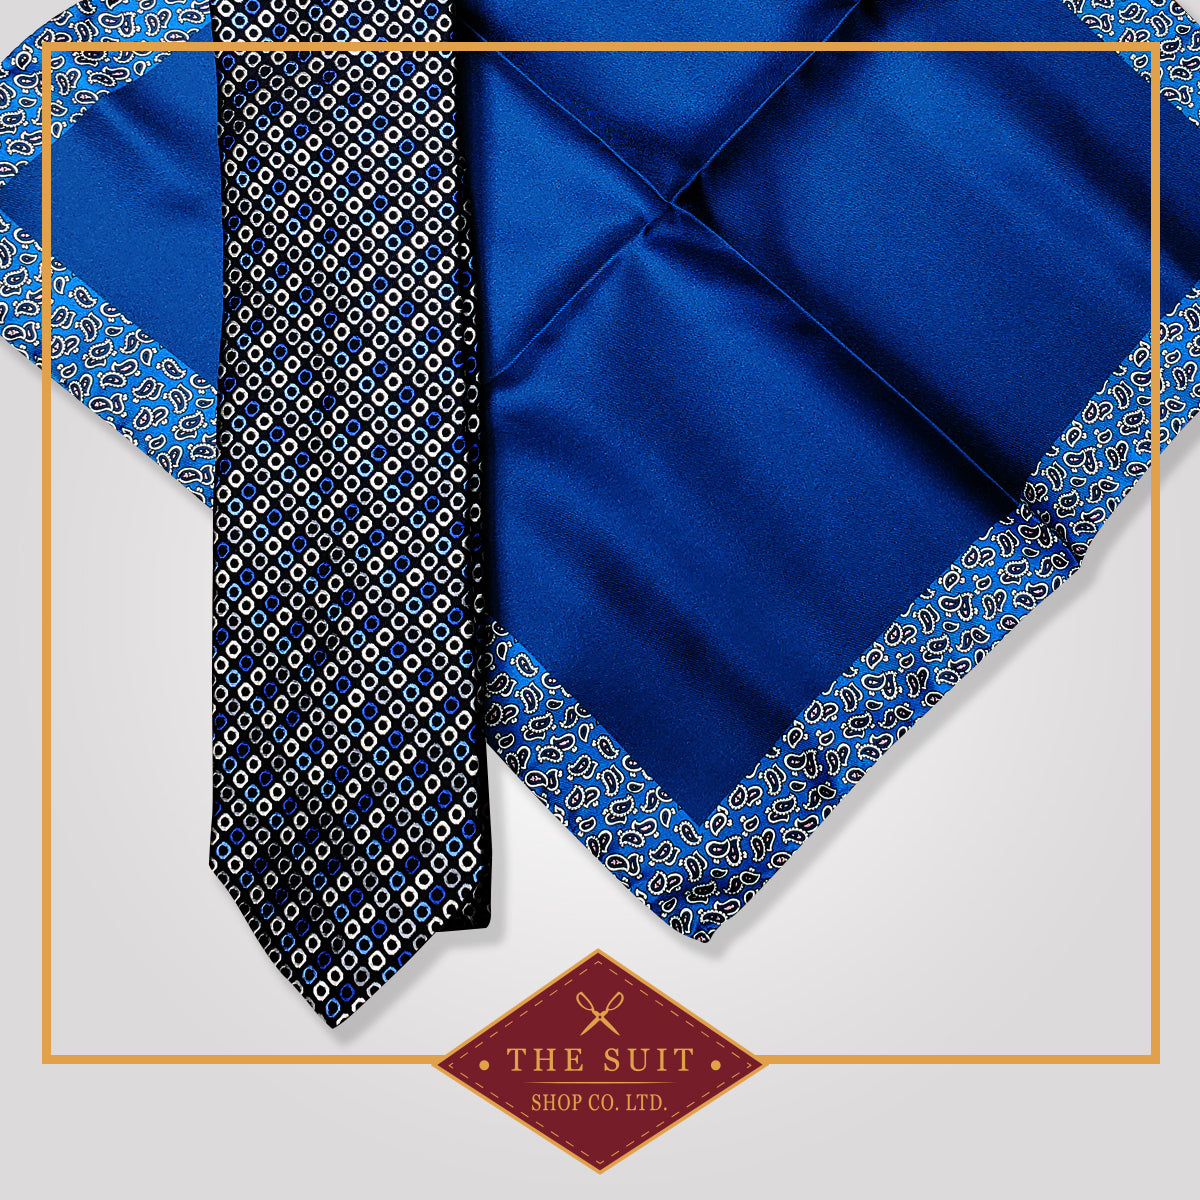 Blue Whale Tie and Congress Blue Pocket Square